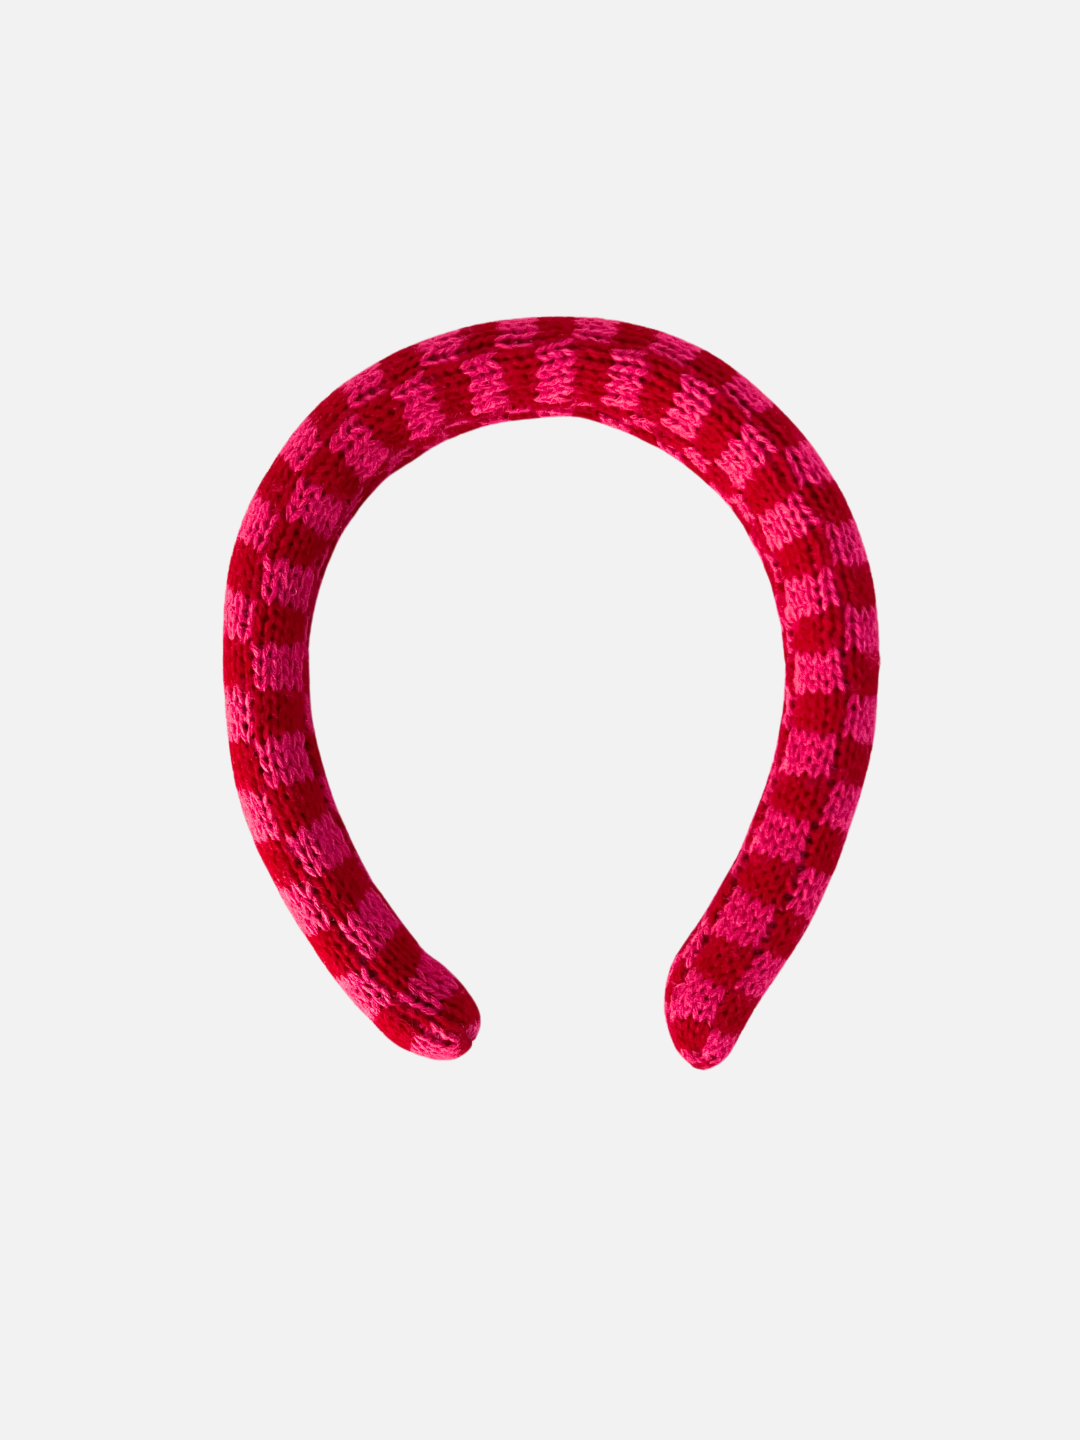 A kids' knitted headband in a pink and red check